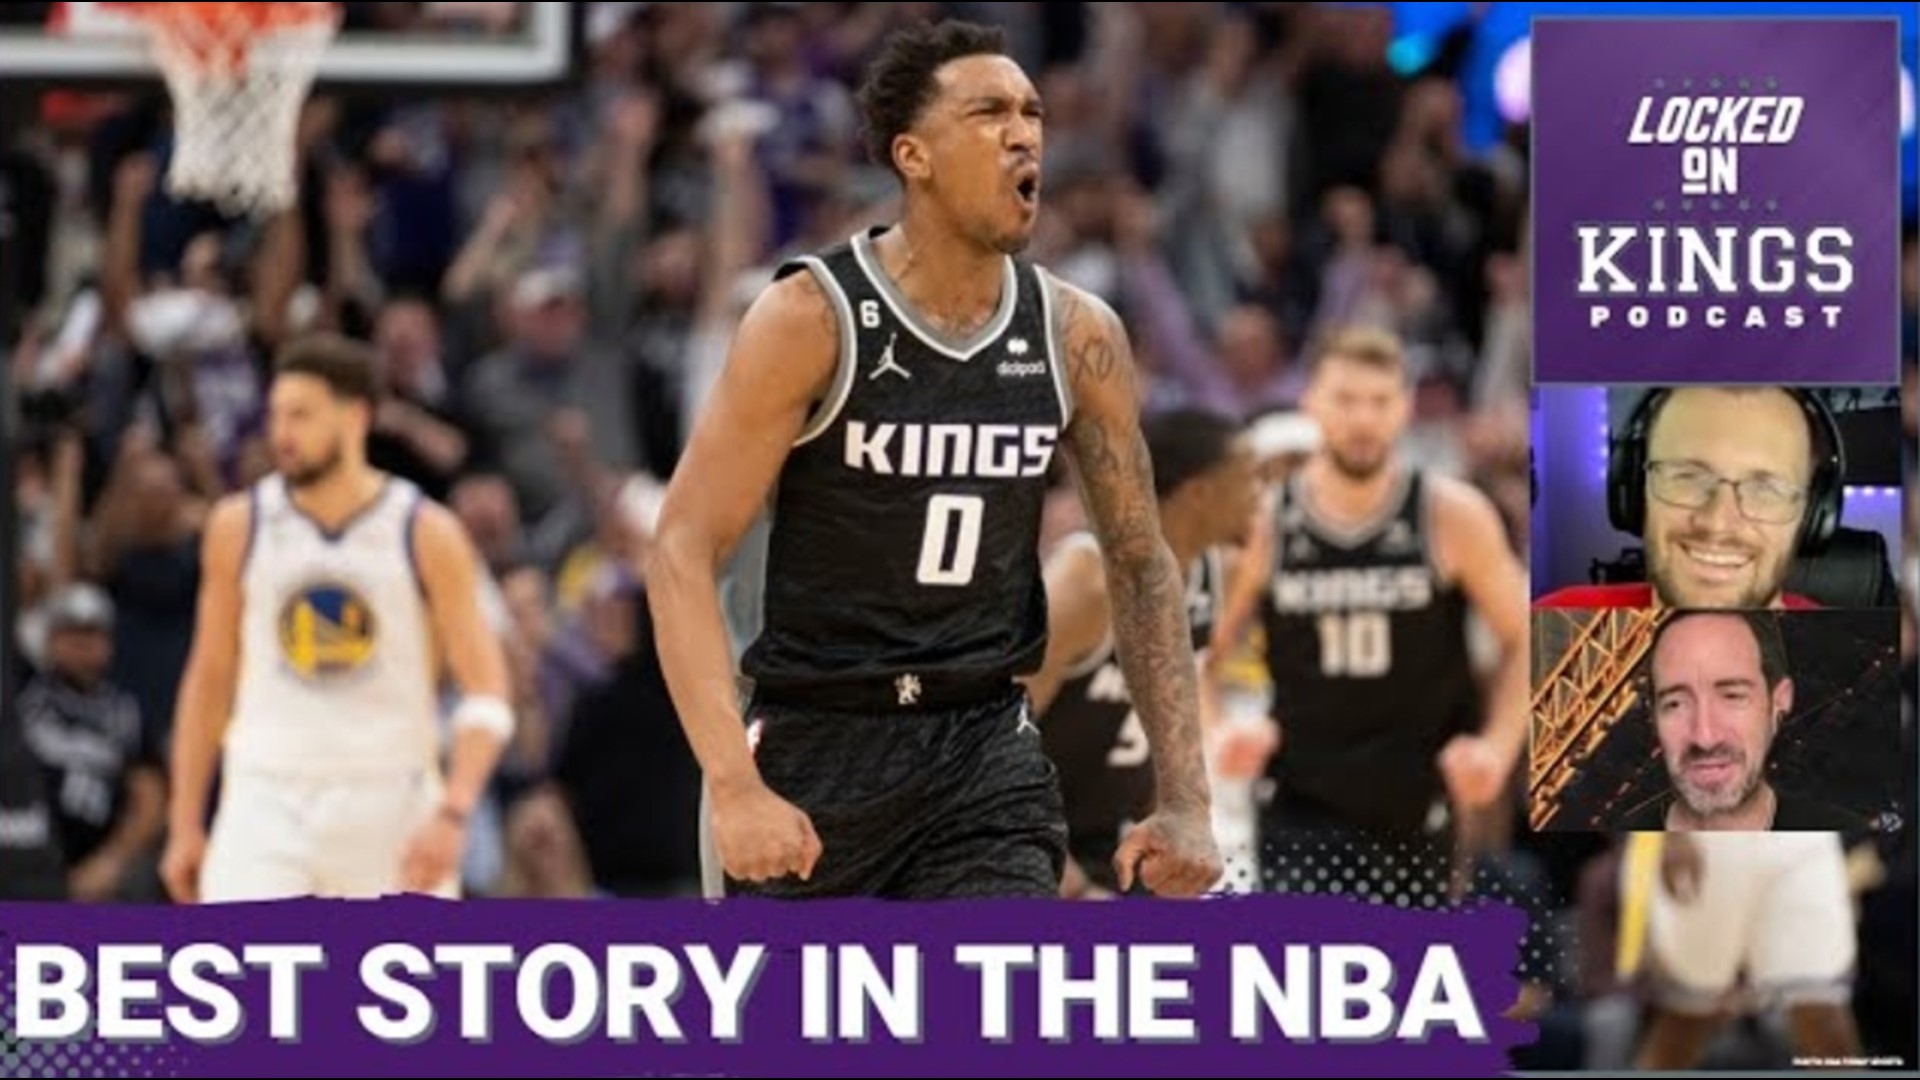 Howard Beck joins Matt to discuss the Sacramento Kings as a national story, trading Keegan Murray, re-signing Harrison Barnes, and more.